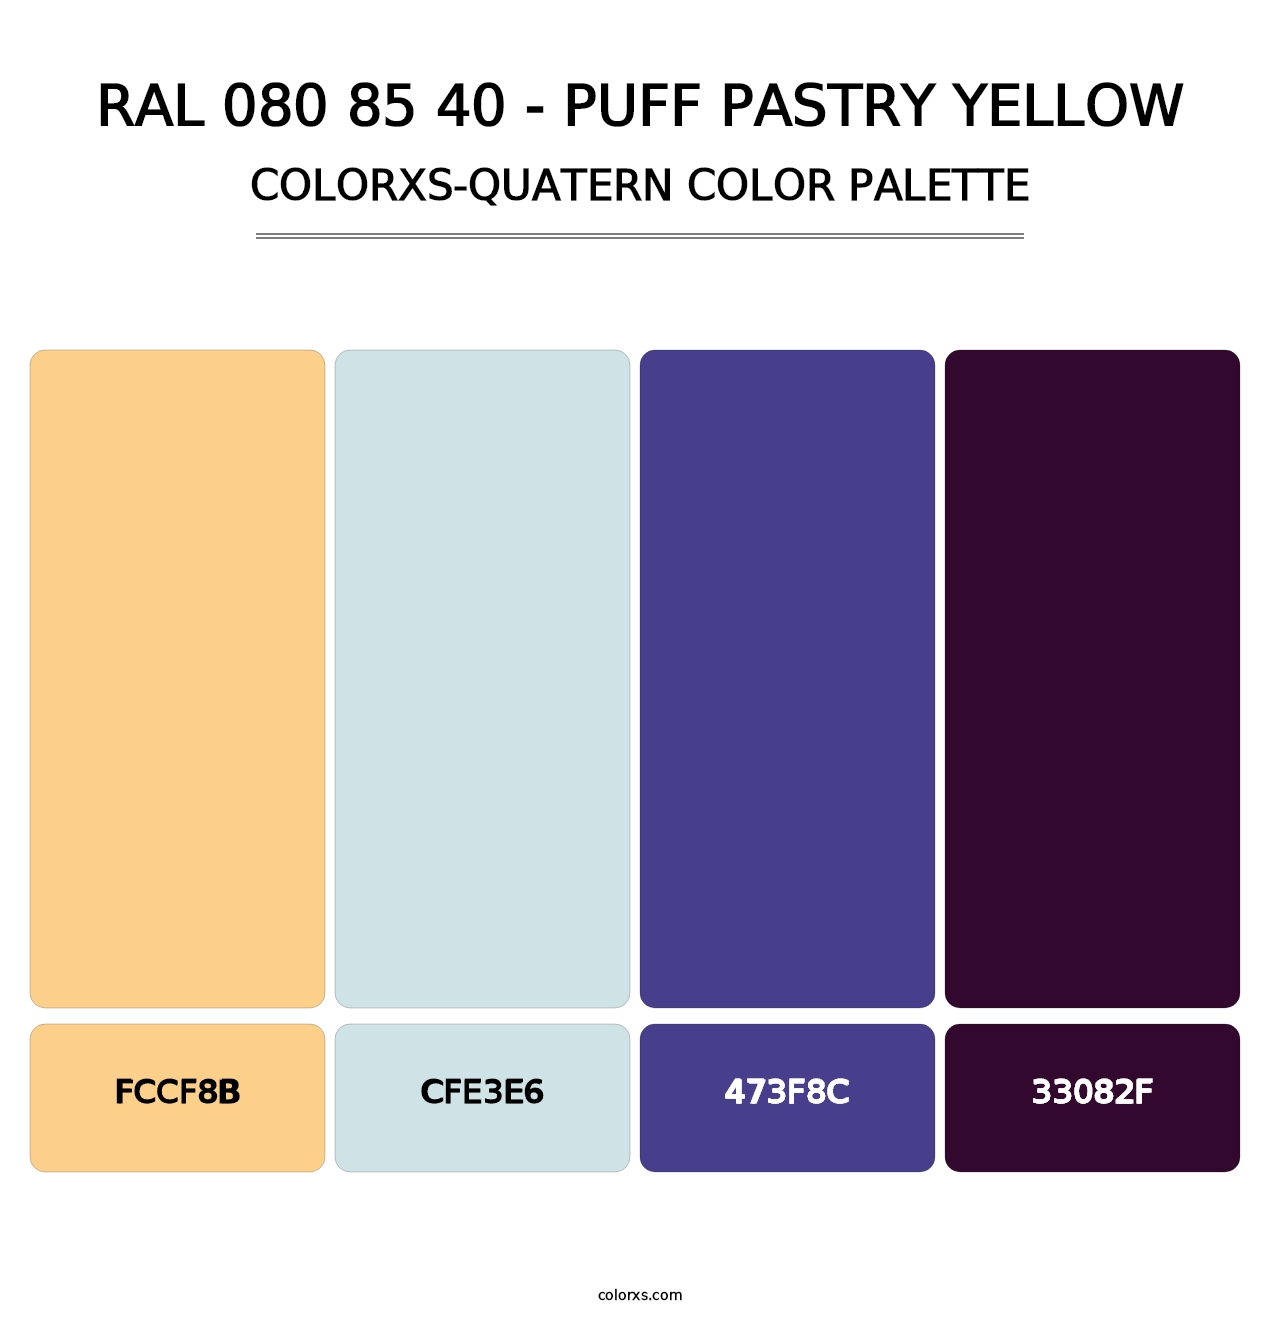 RAL 080 85 40 - Puff Pastry Yellow - Colorxs Quatern Palette